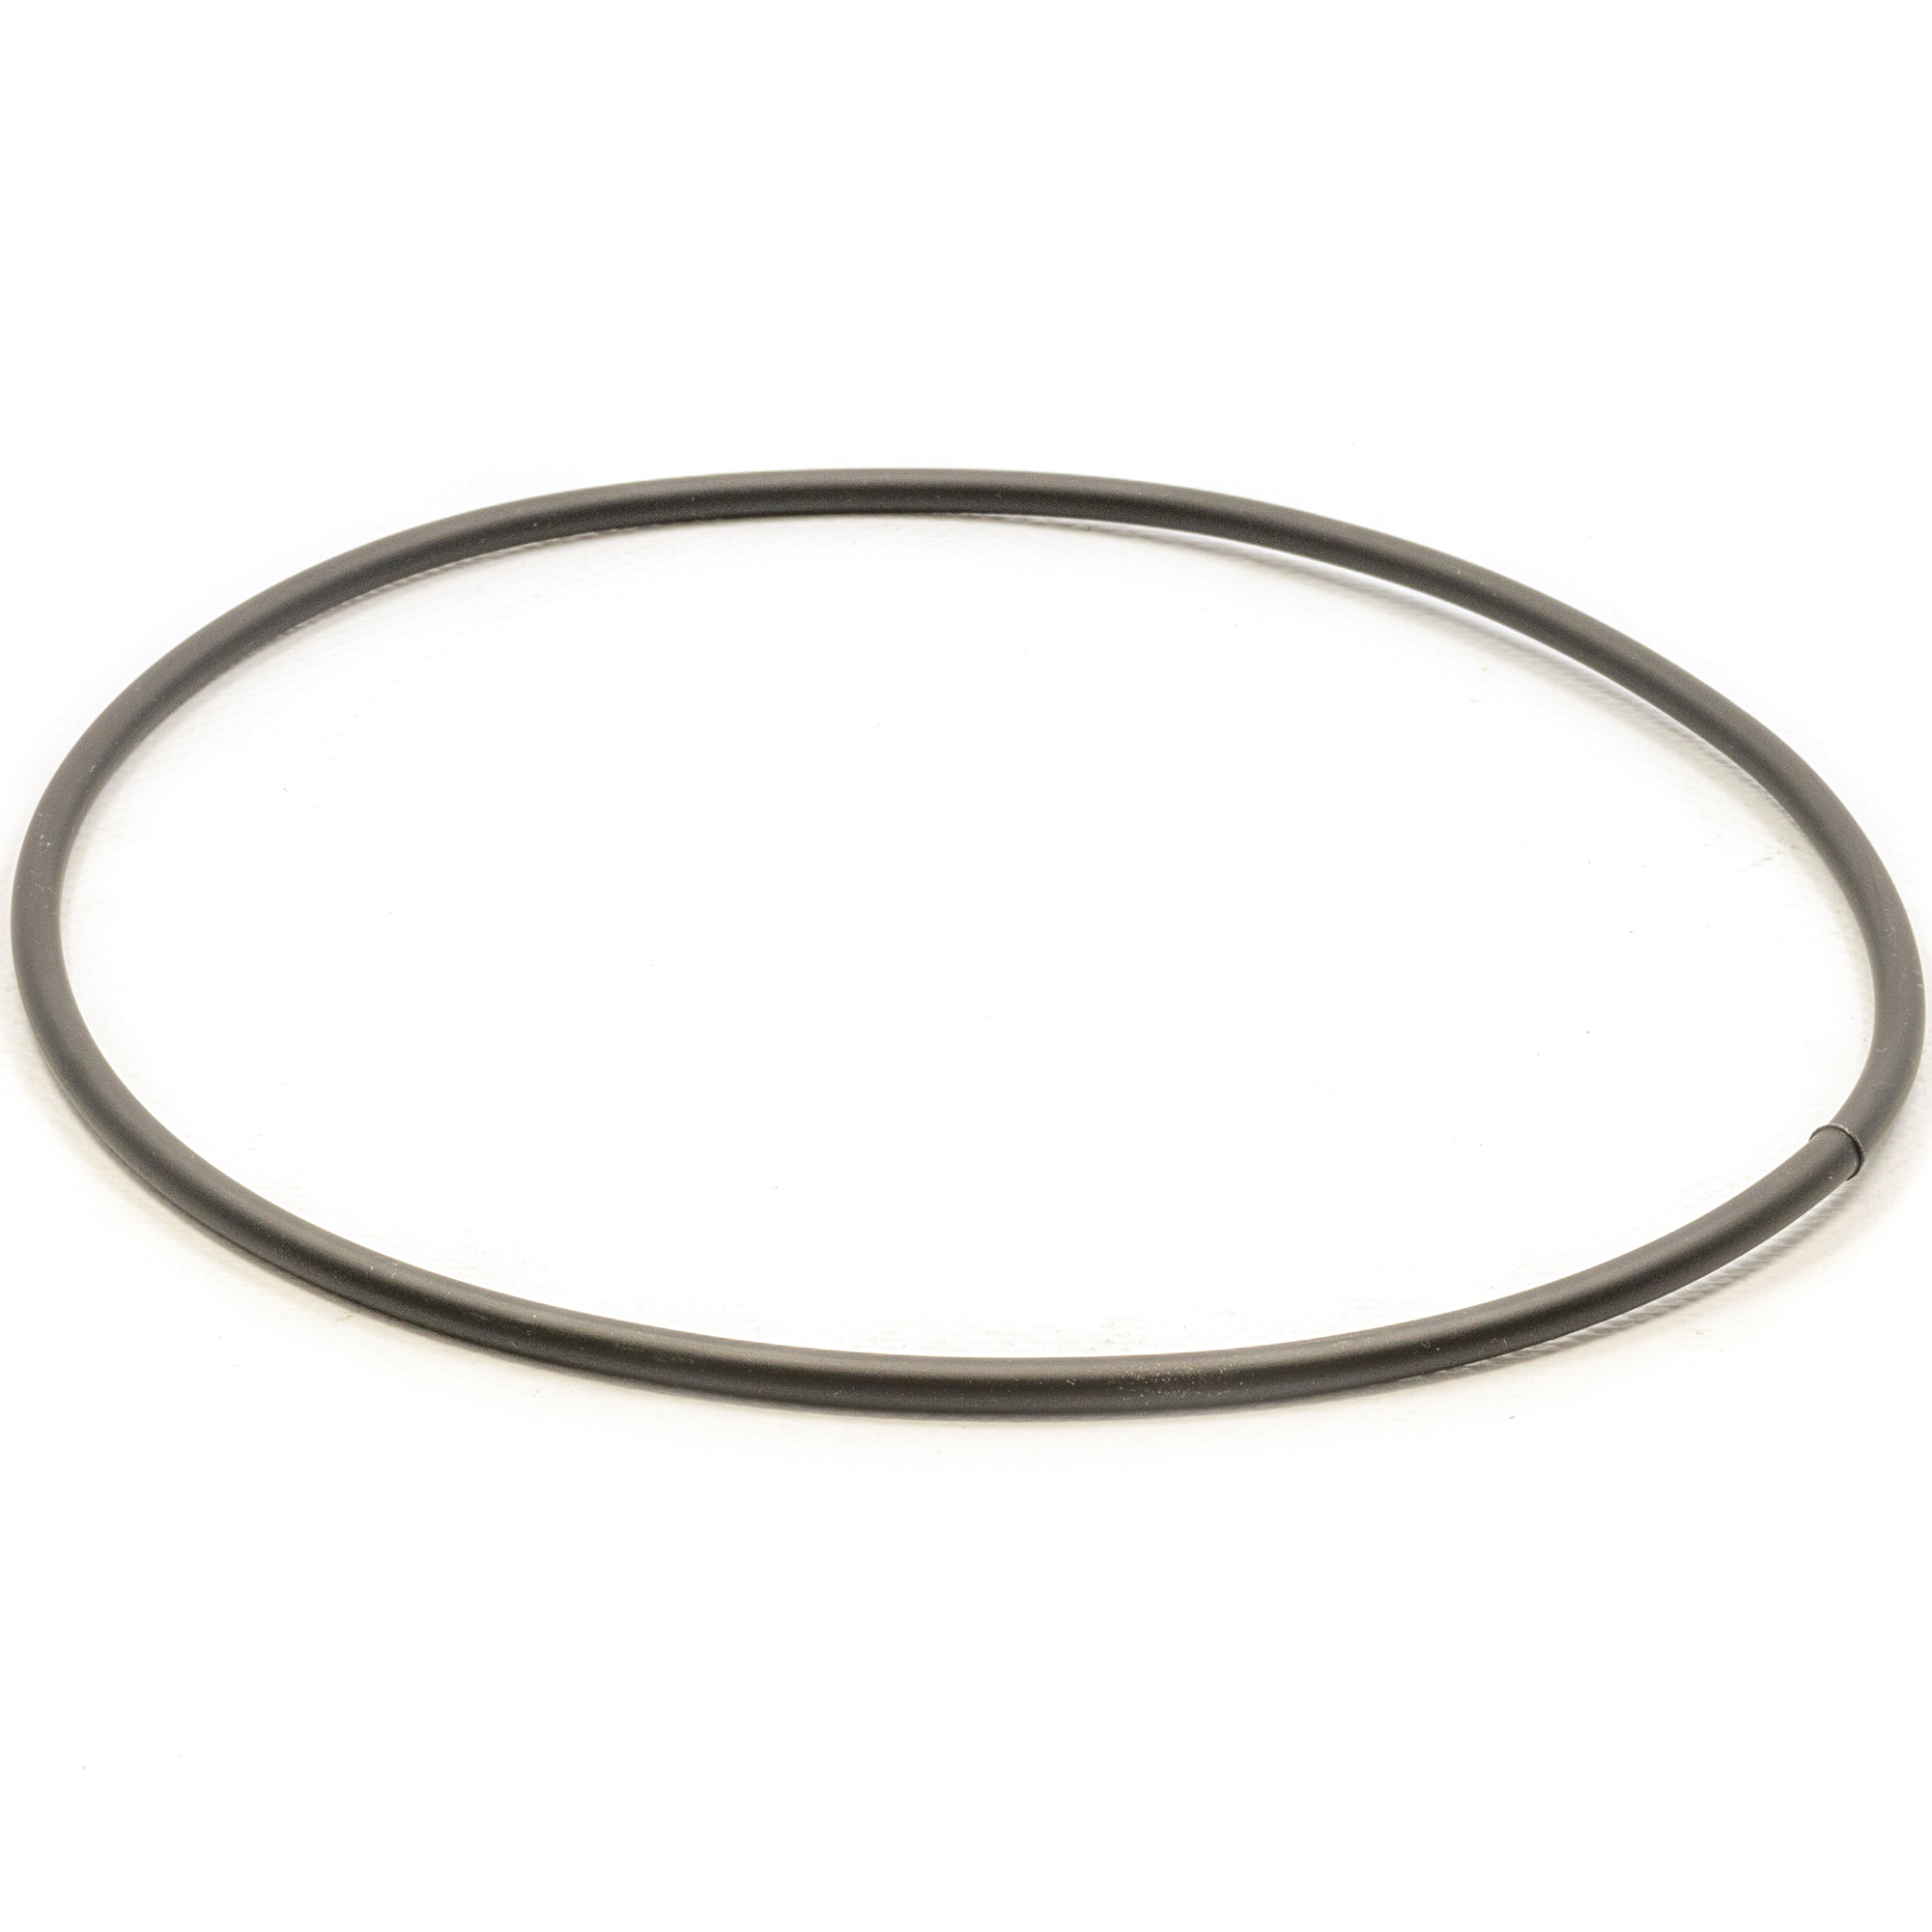 HAVE 205921896 Sealing ring PVC for 300/305/315mm sieves